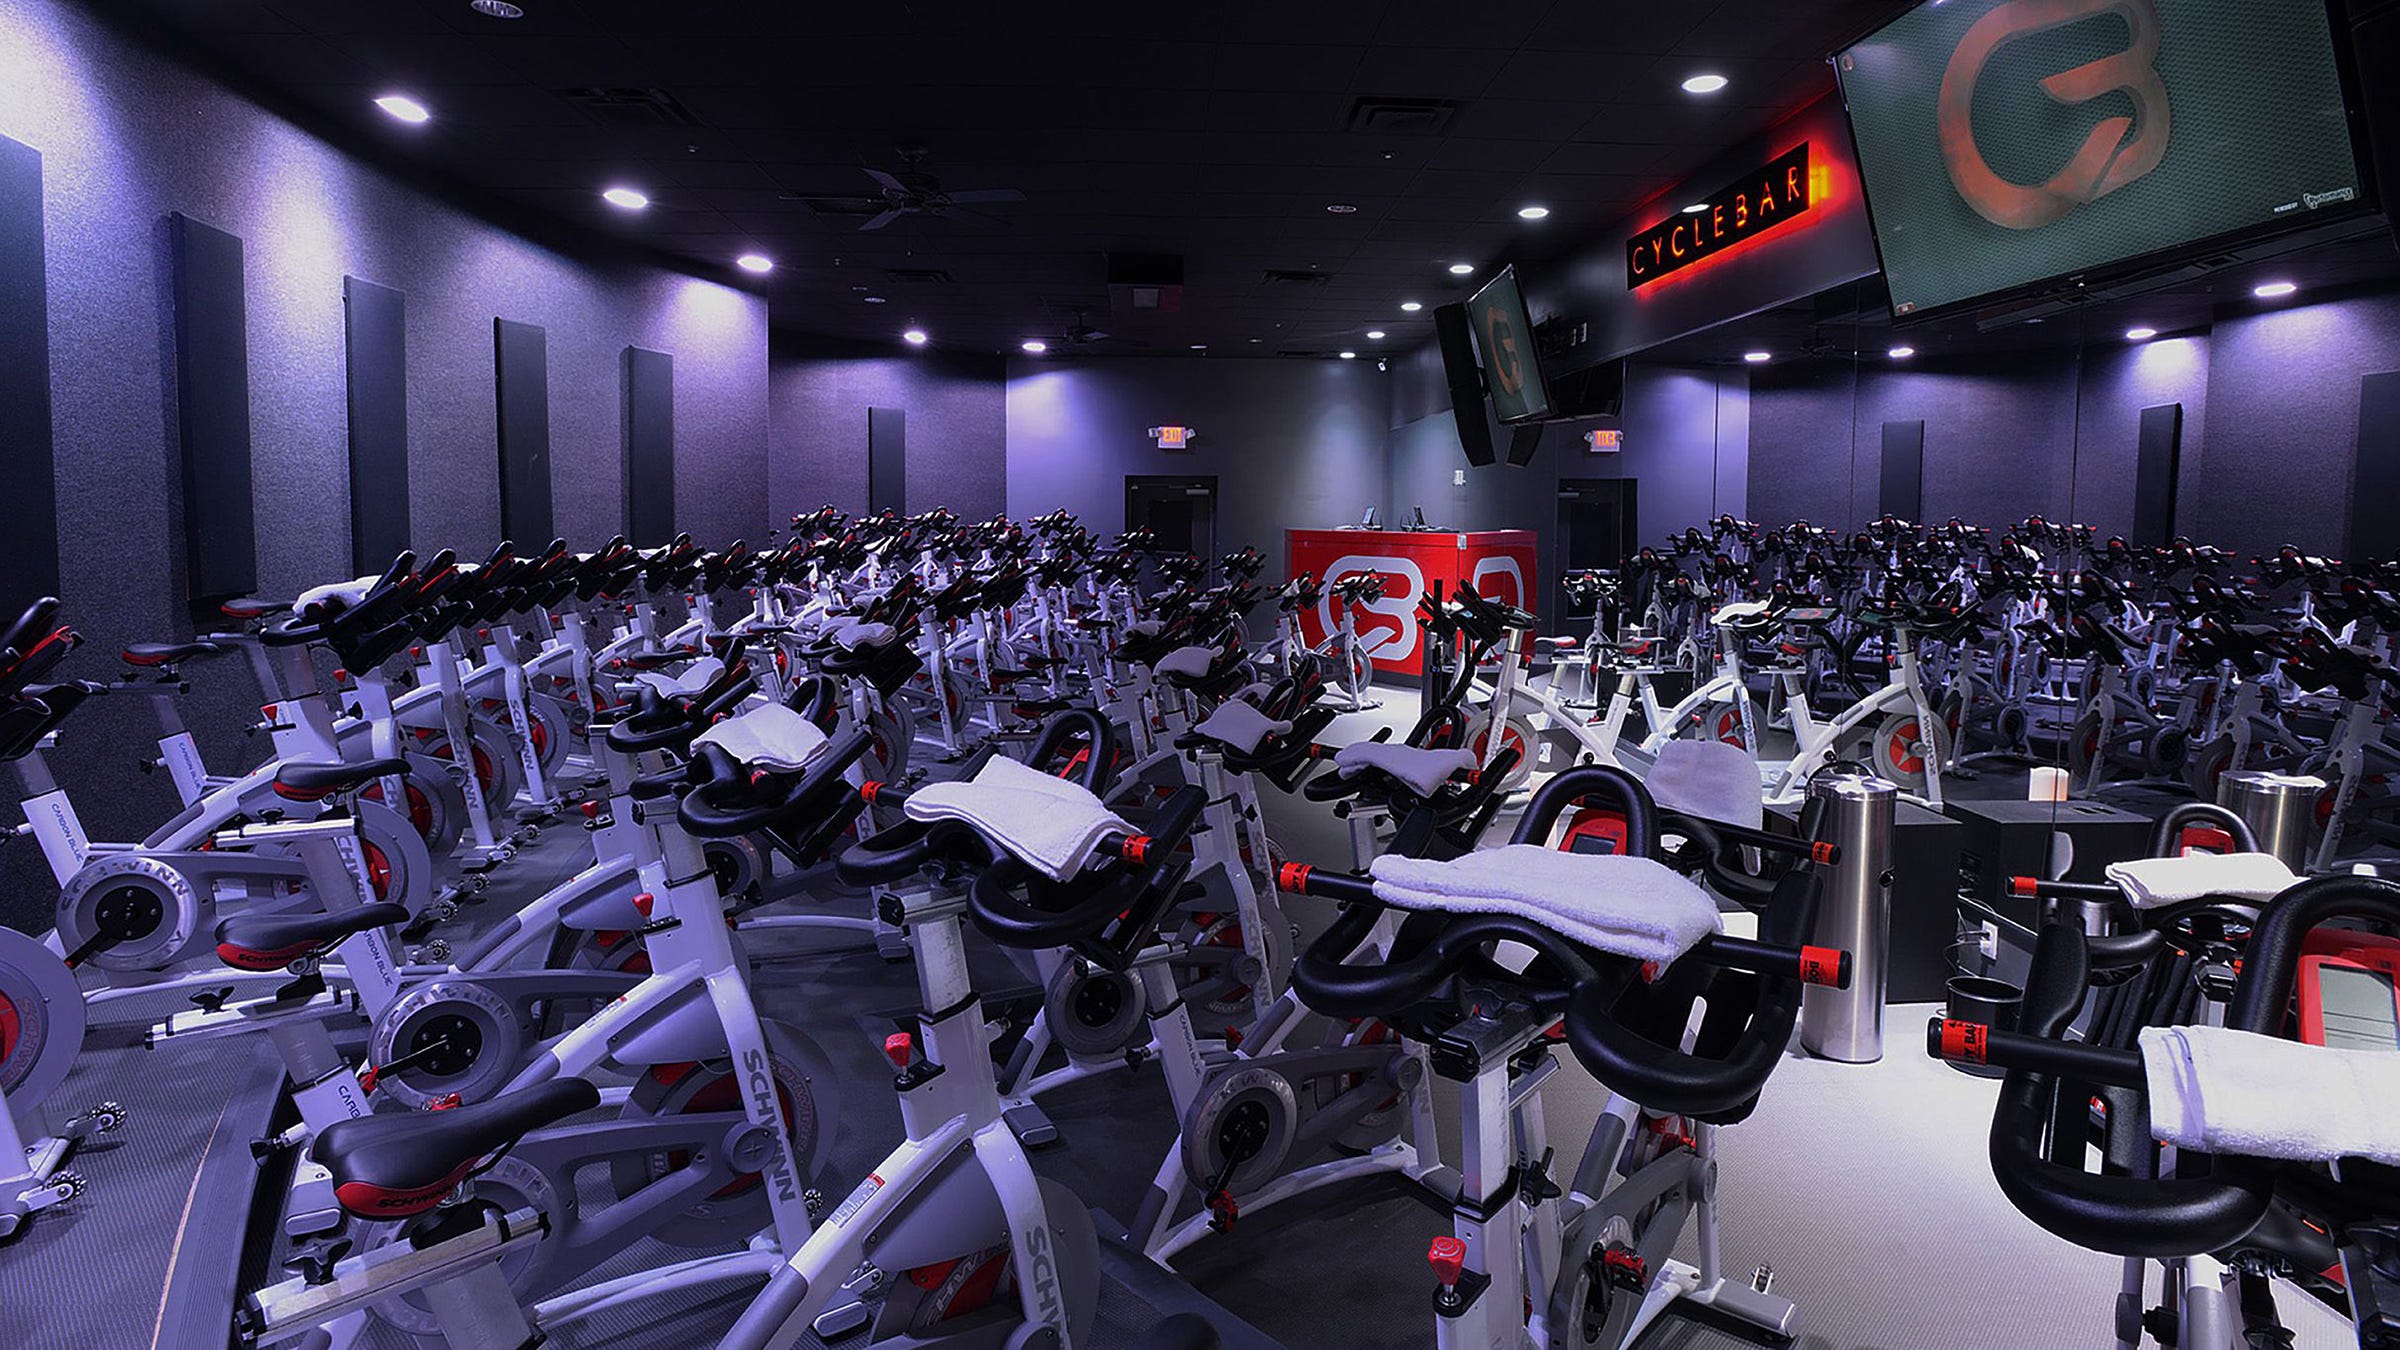 cyclebar spin shoes